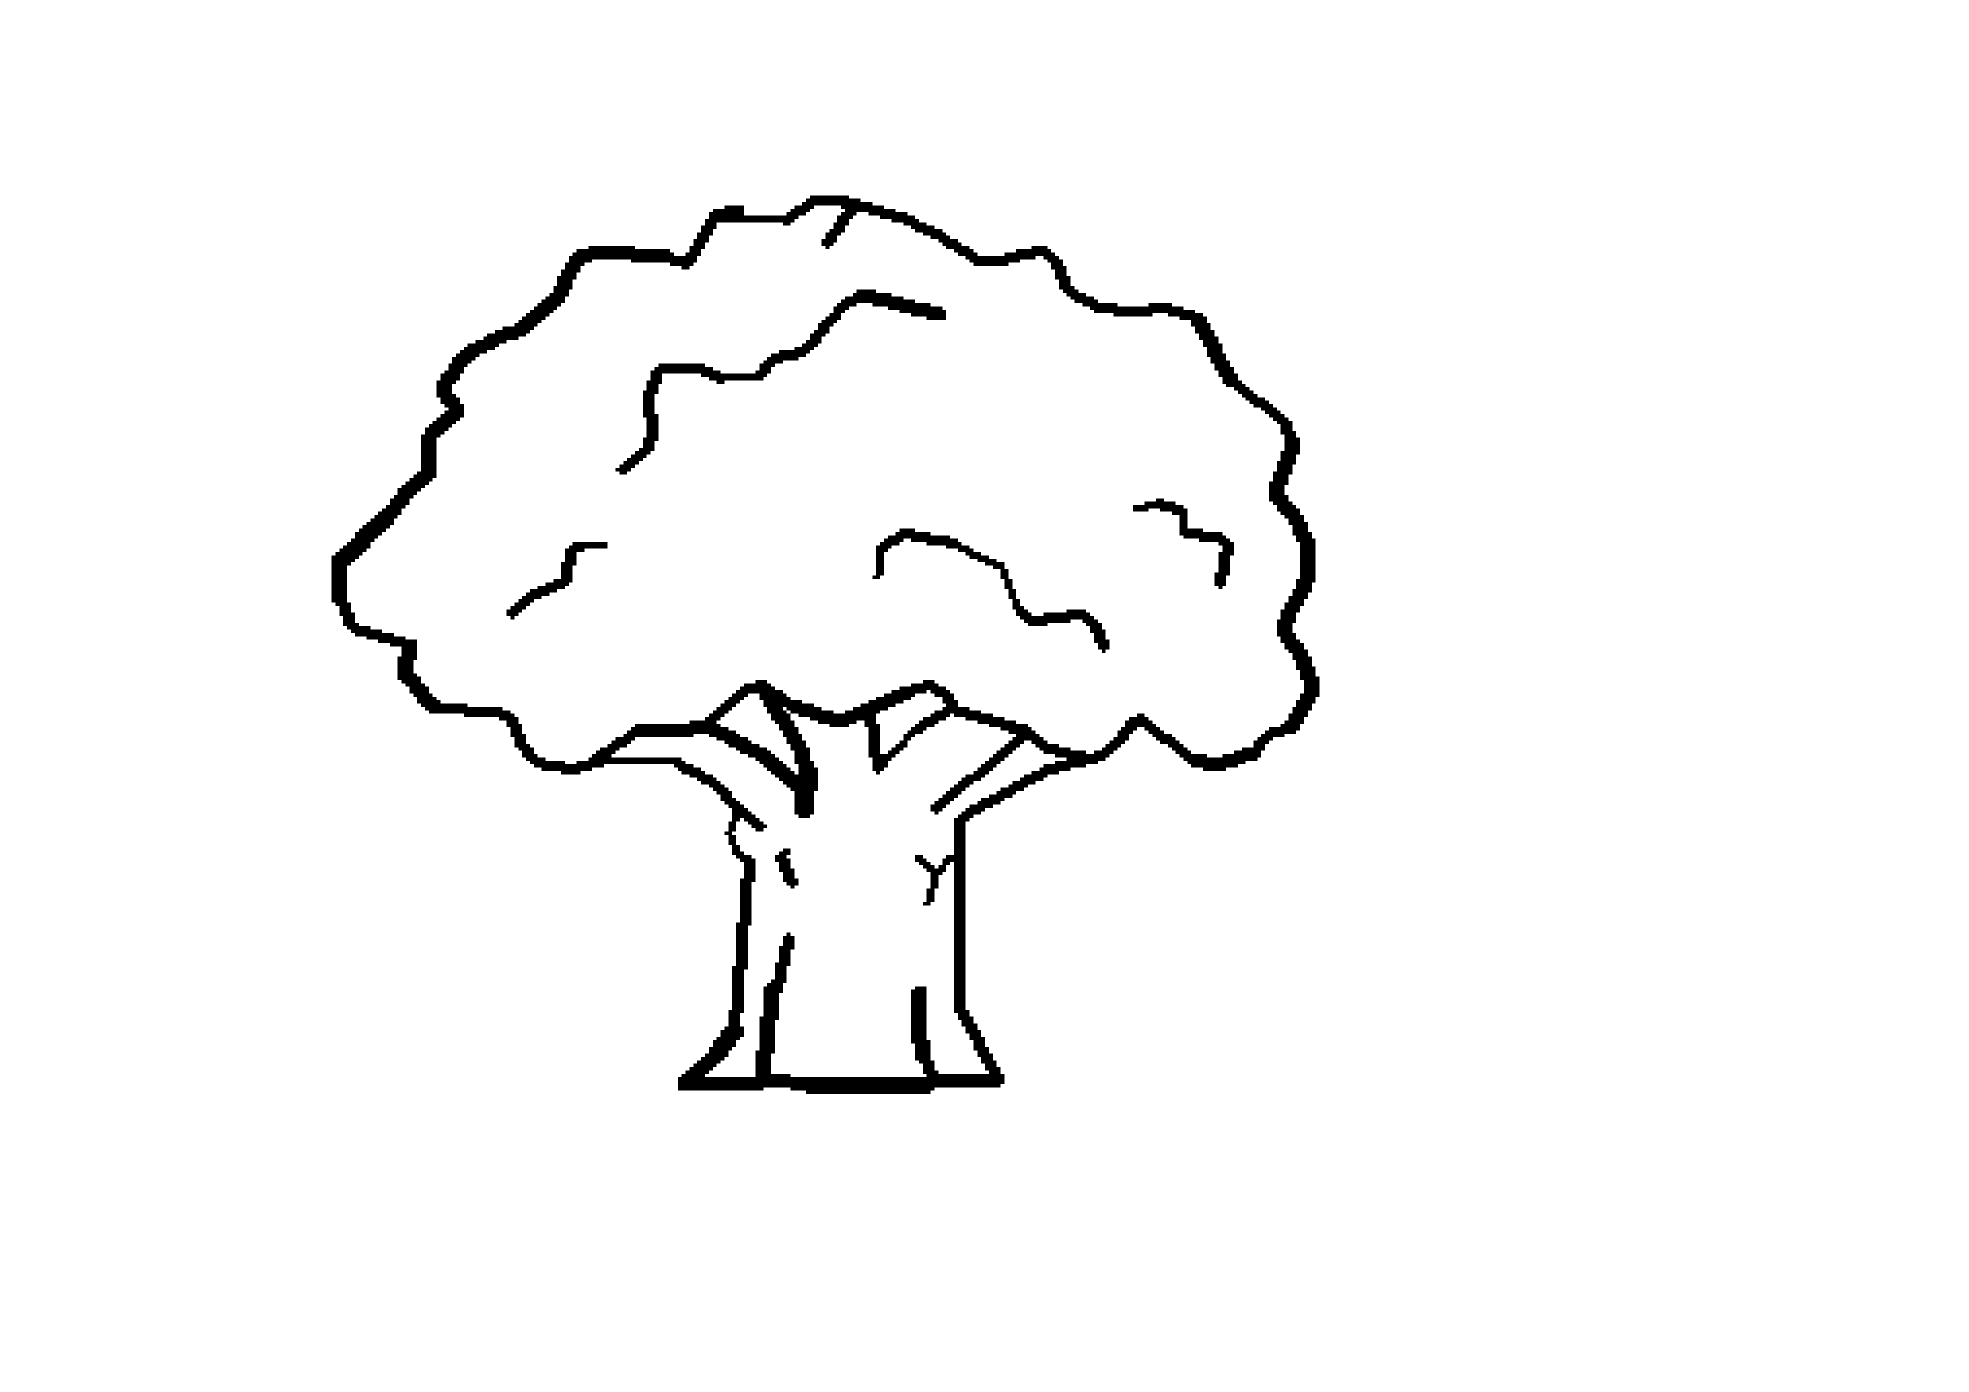 Tree Clipart Black And White  - Tree Clip Art Black And White